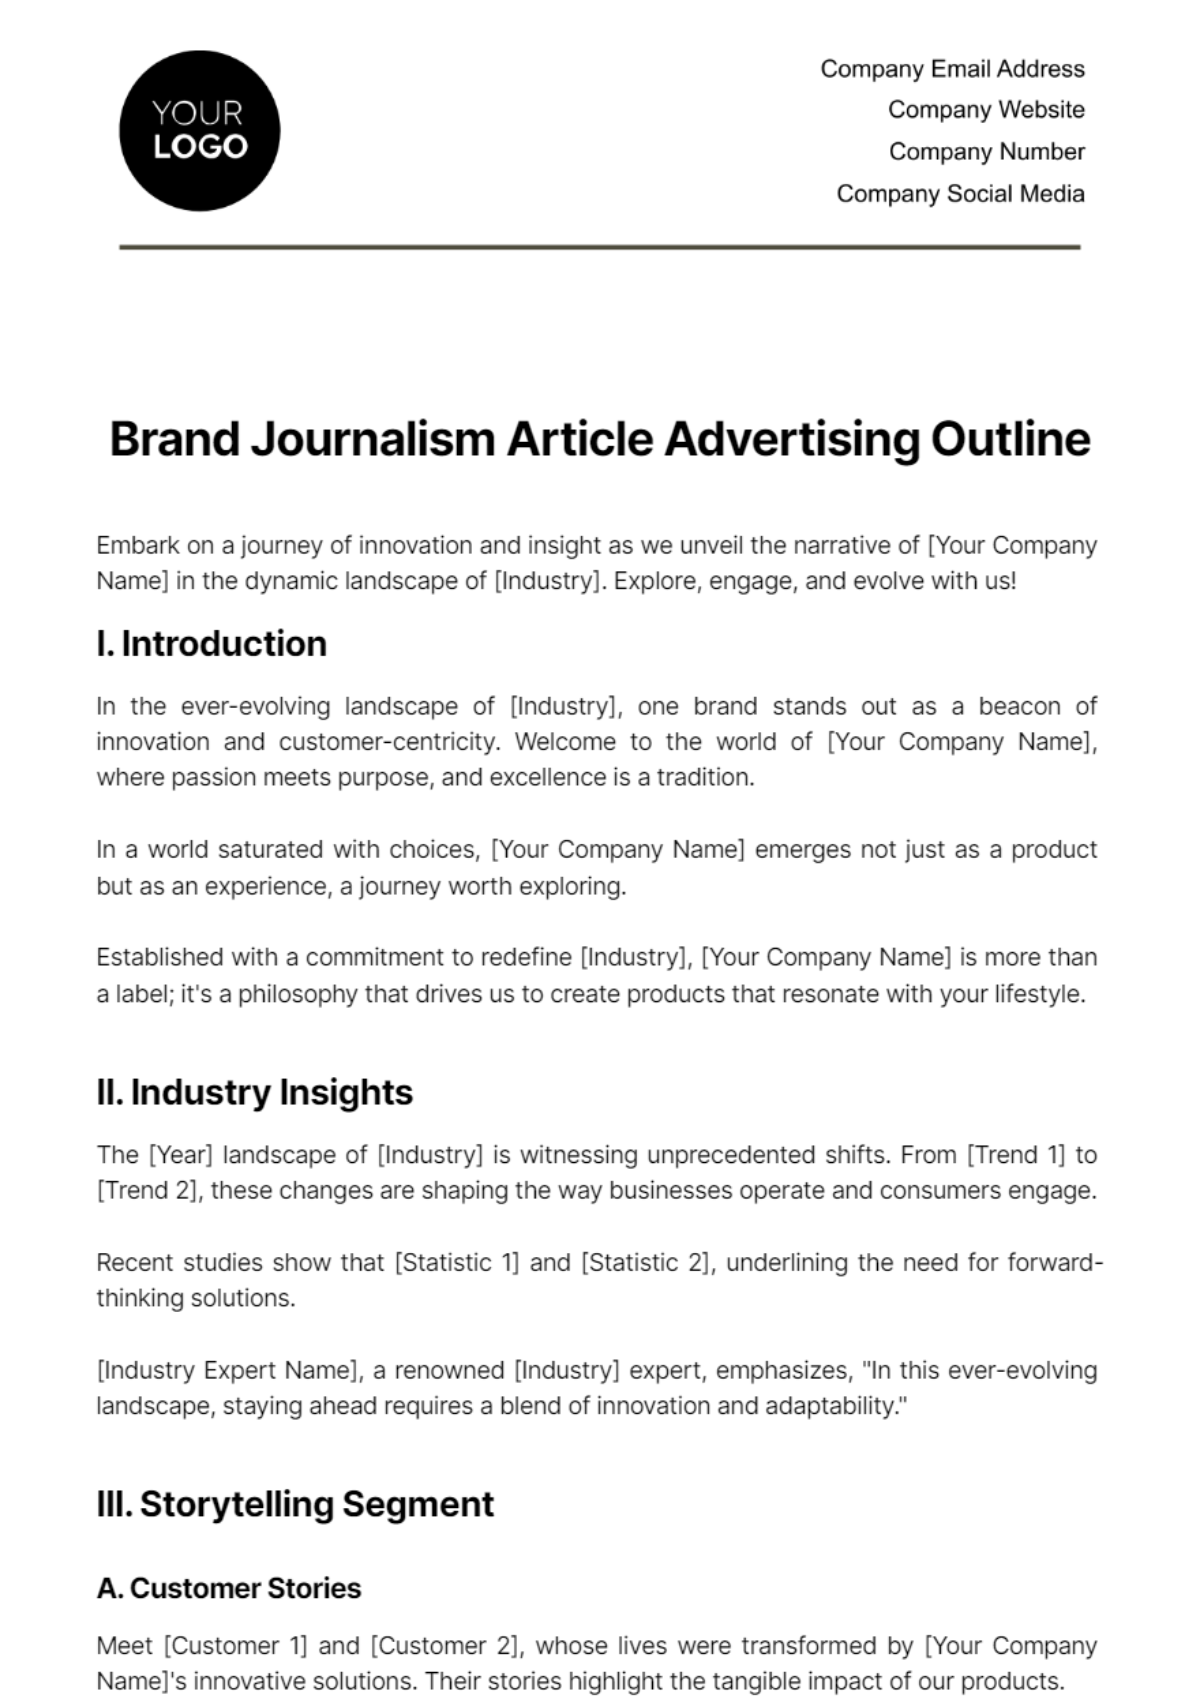 Free Brand Journalism Article Advertising Outline Template